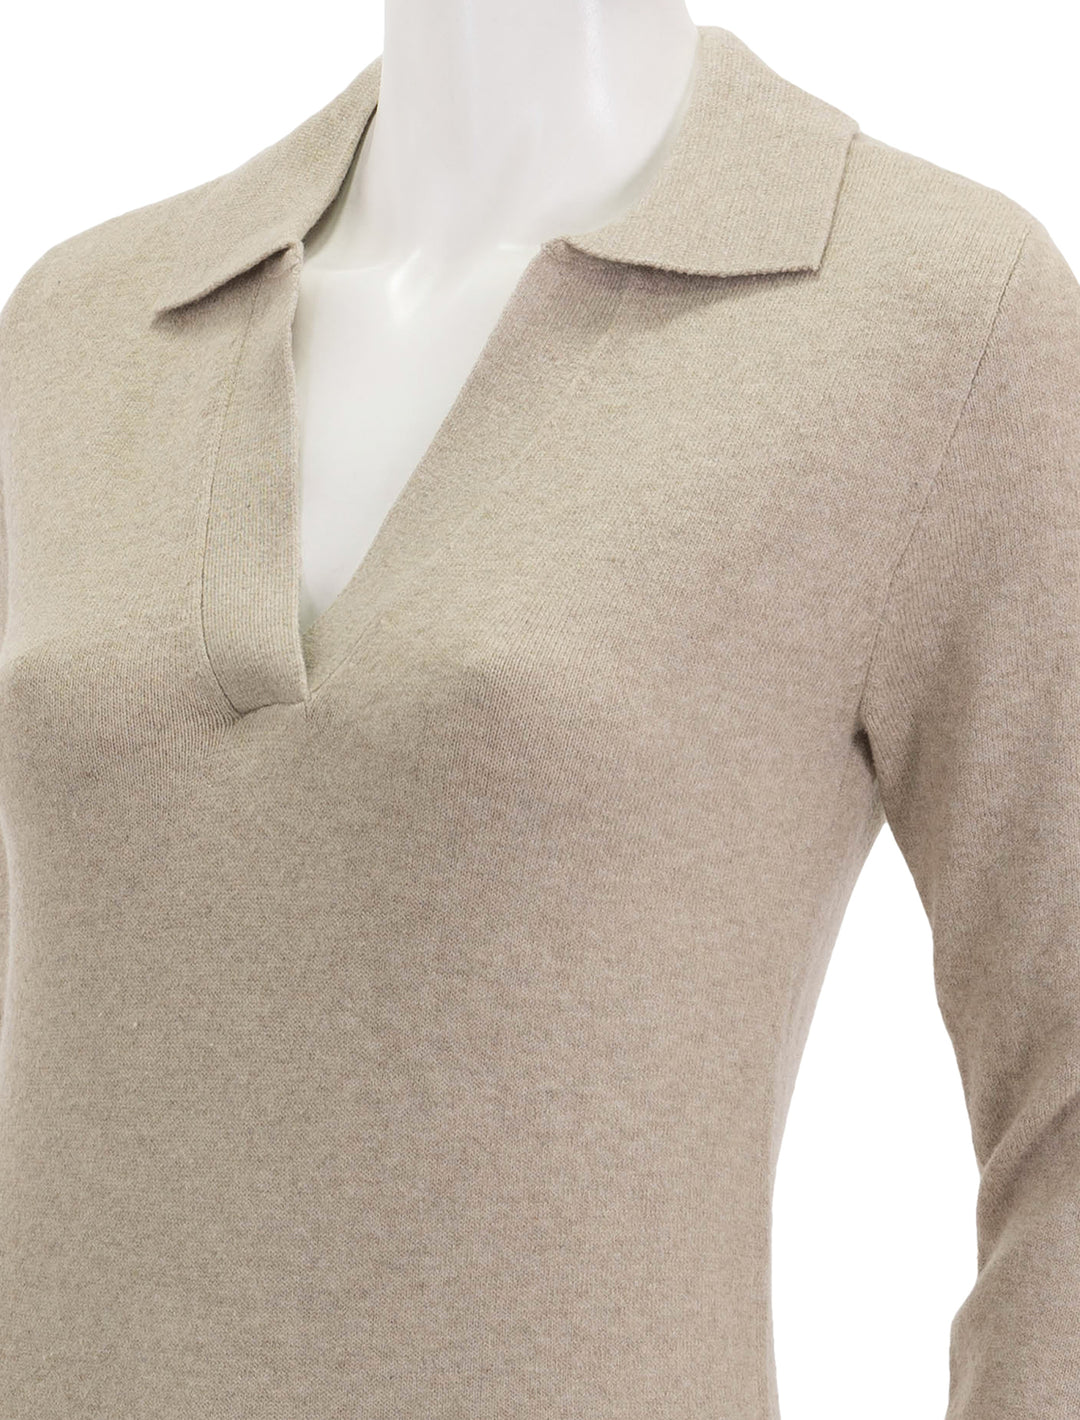 Close-up view of Faherty's jackson sweater polo in oatmeal heather.